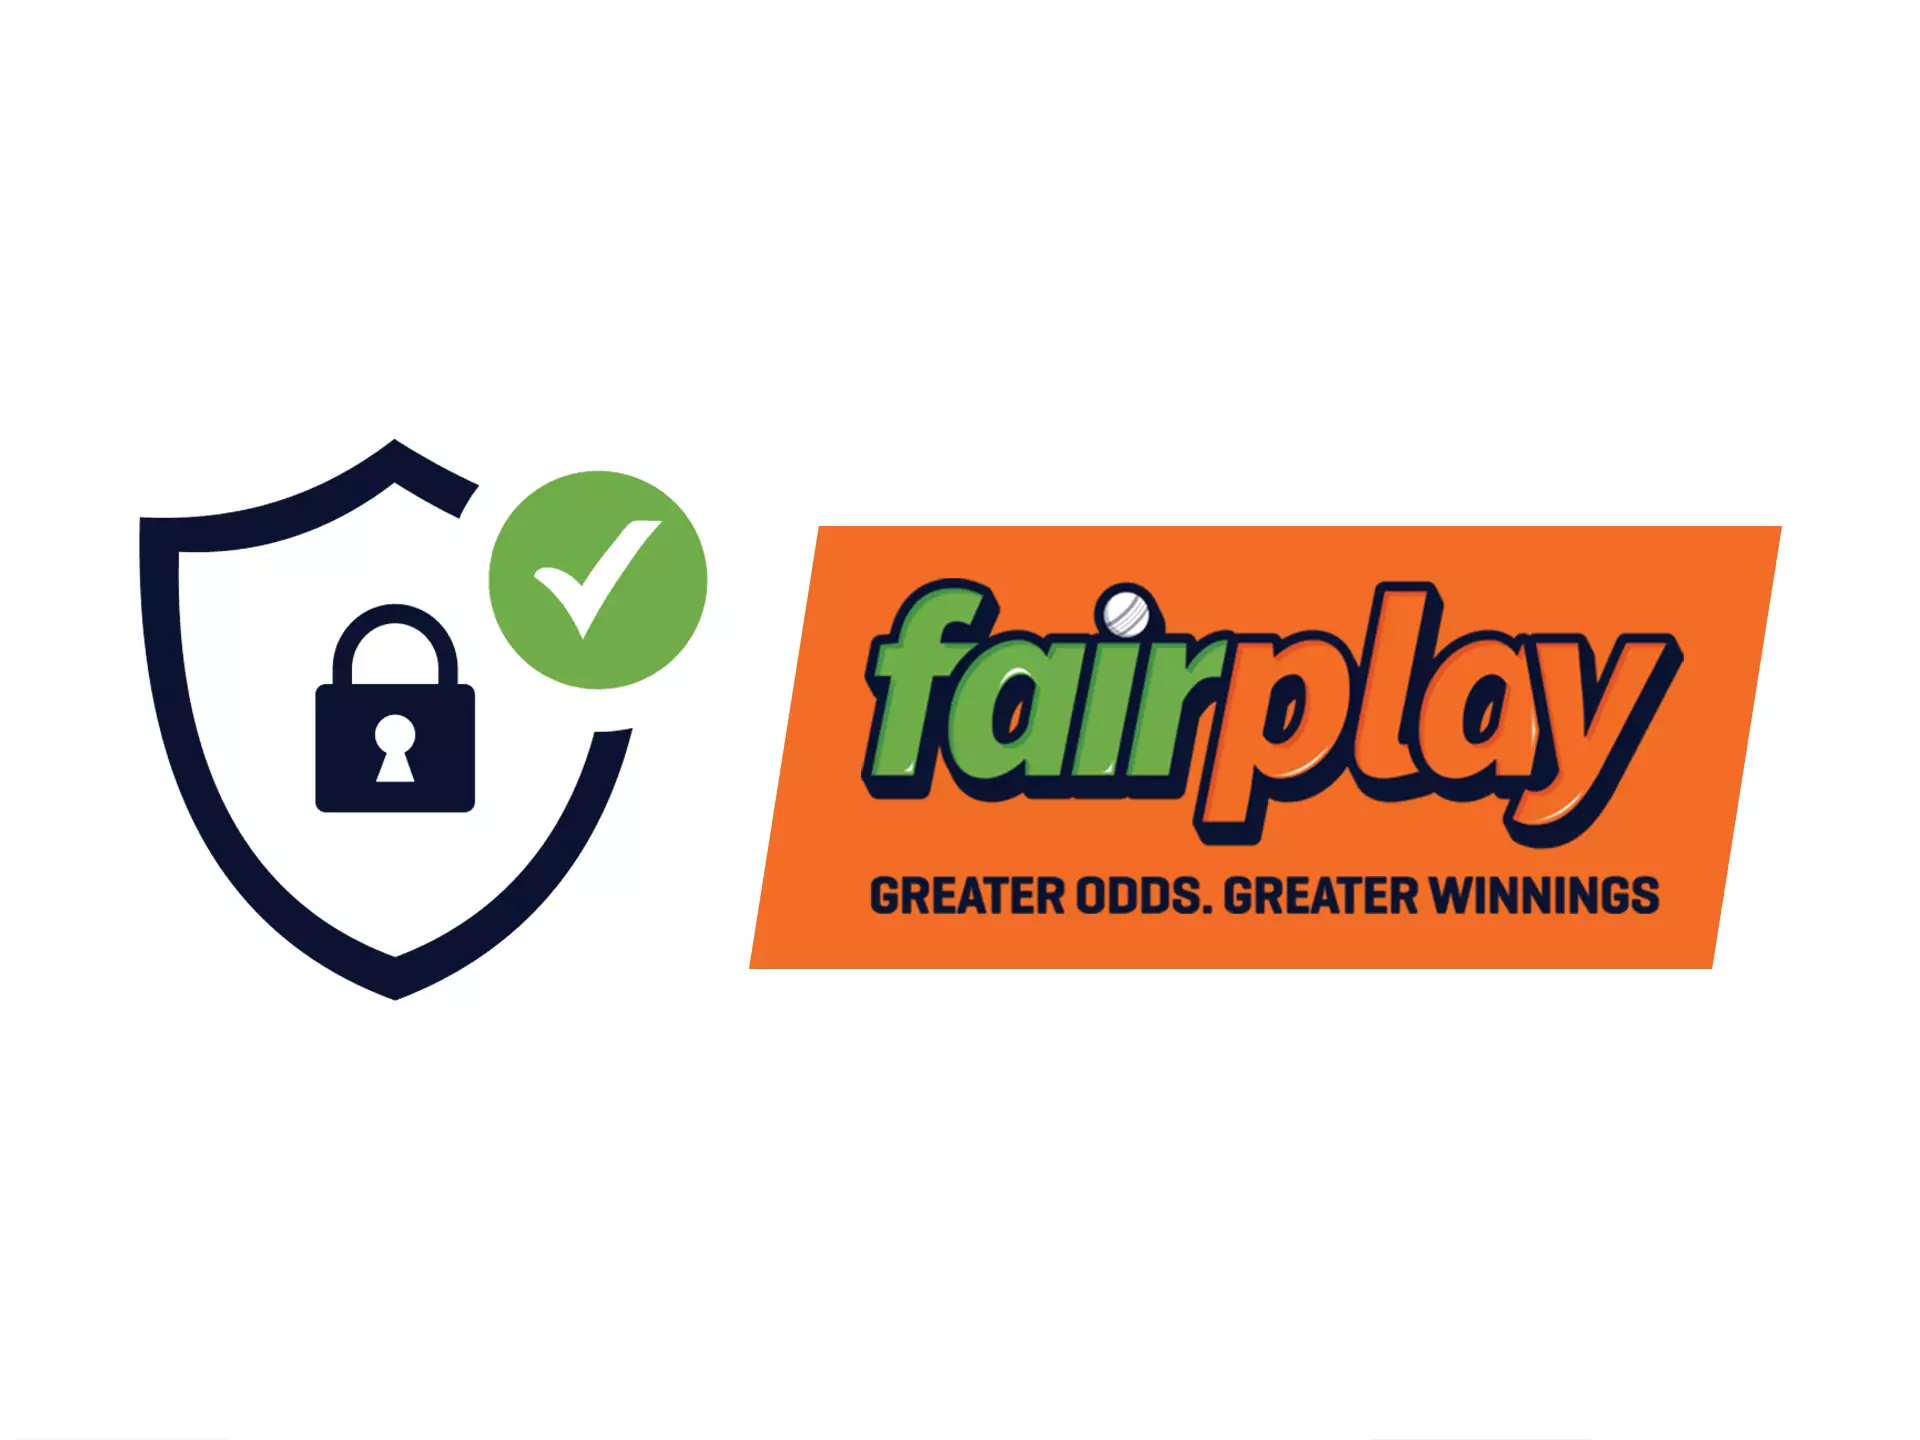 Fairplay protects users personal data securely.